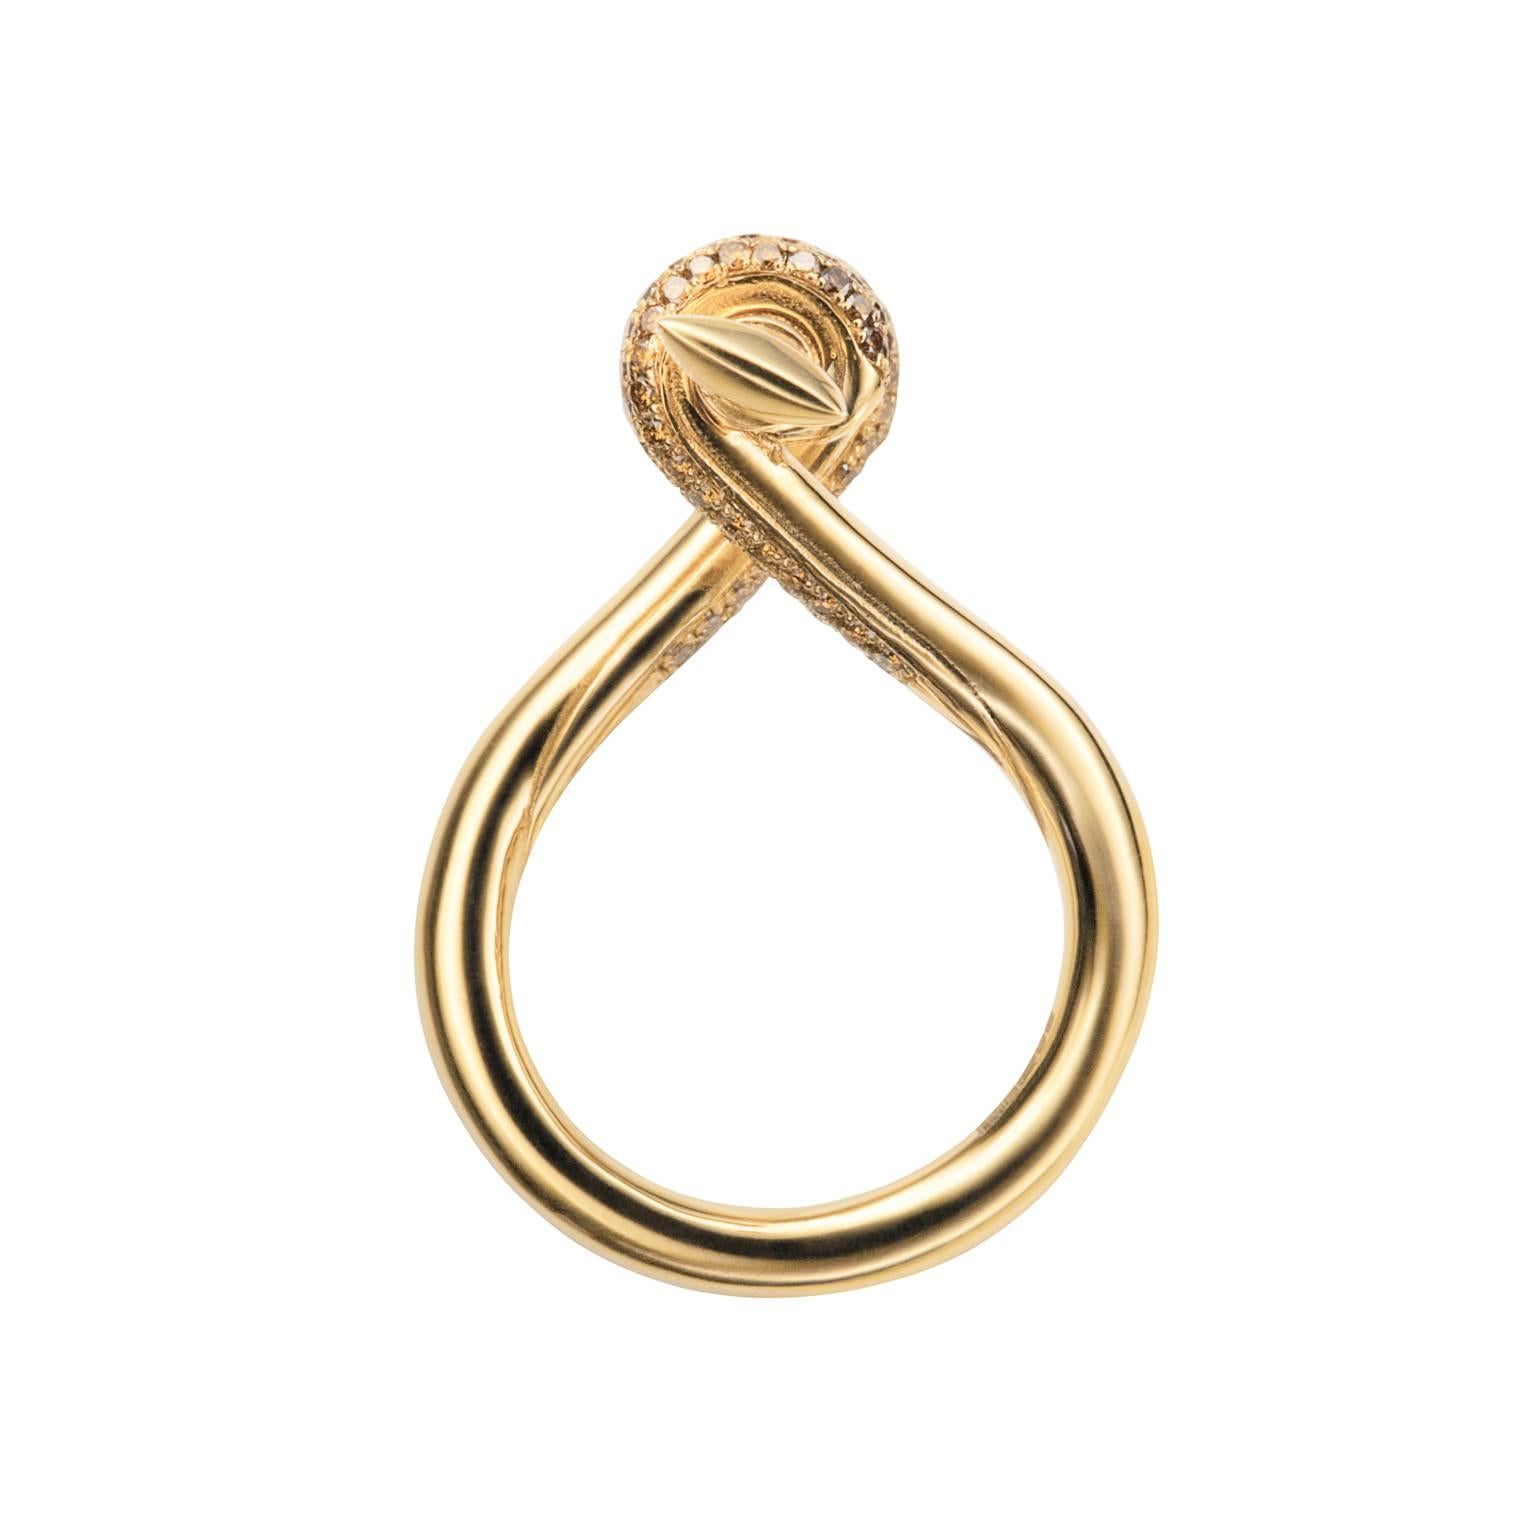 Taking its design cues from the traditional shackle, this striking ring twists away from the finger to hold the shackle bar elegantly above the finger. A subtle and sculptural design, this ring whispers tales of subversive luxury. Cognac brown